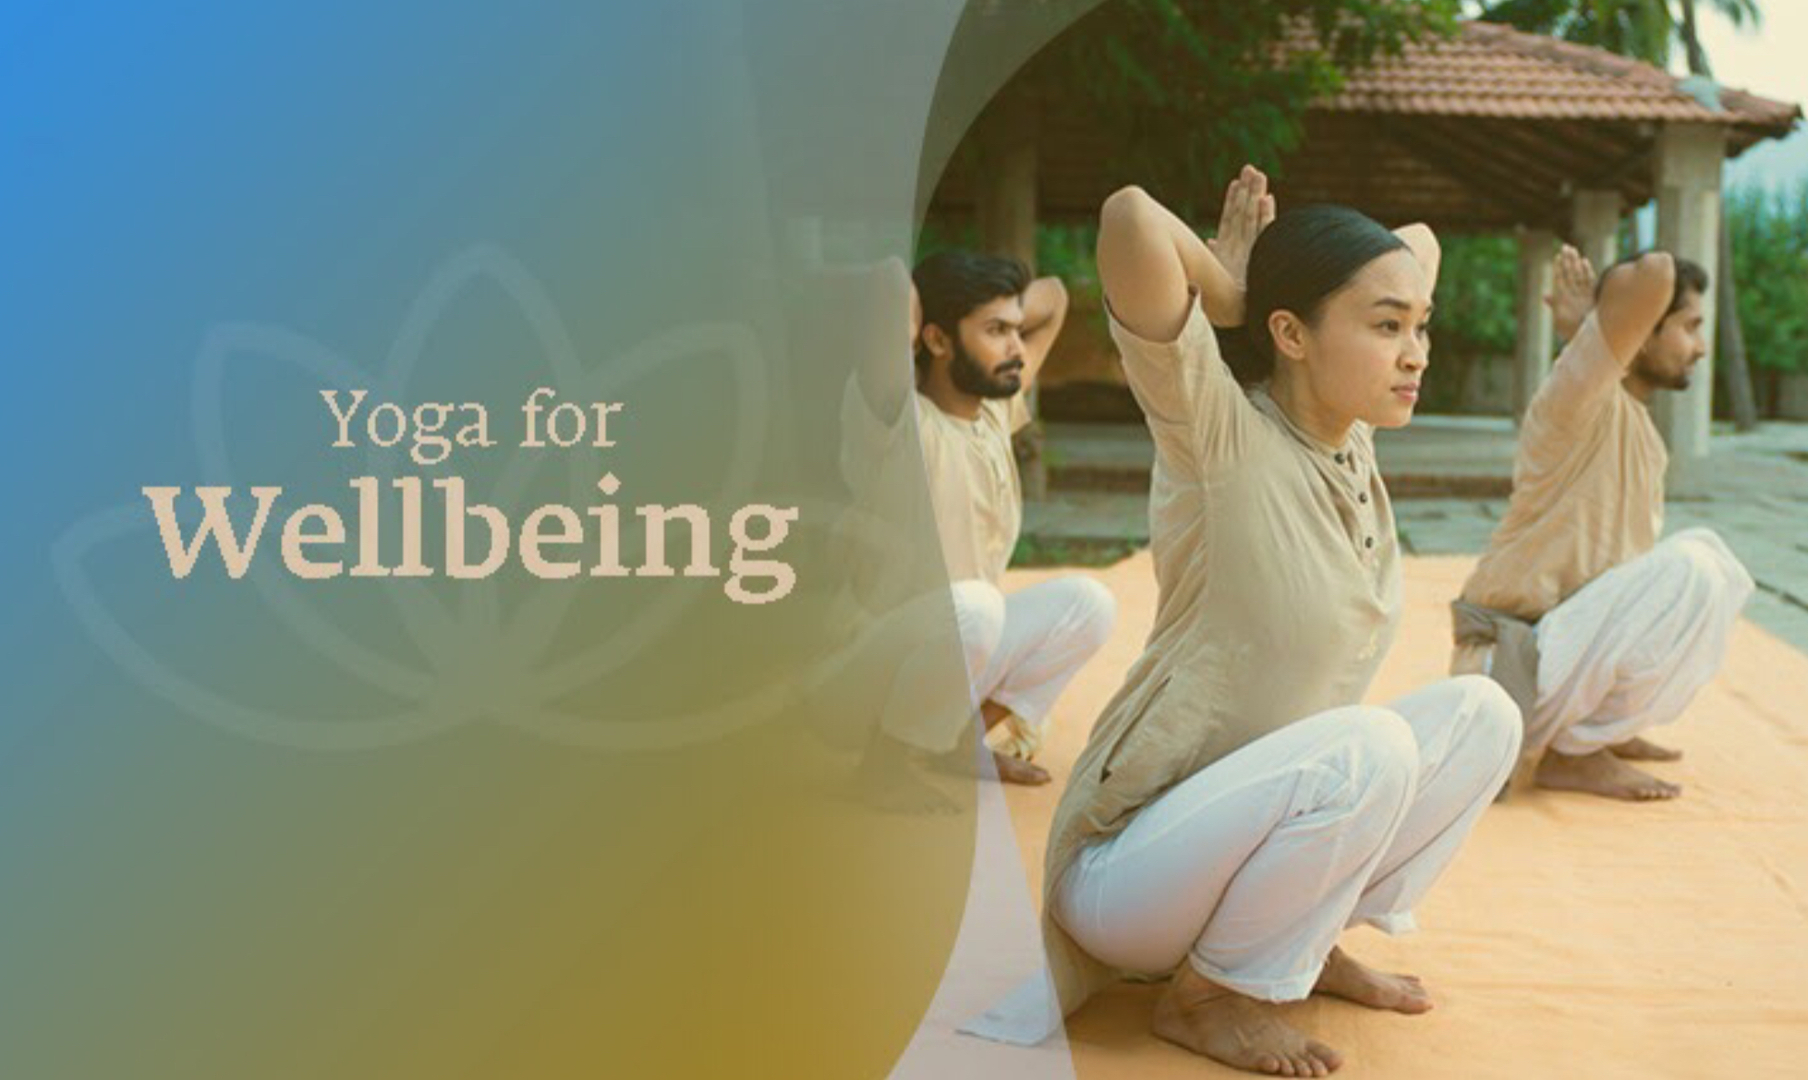 Yoga for Wellbeing, Virtual Event, United States